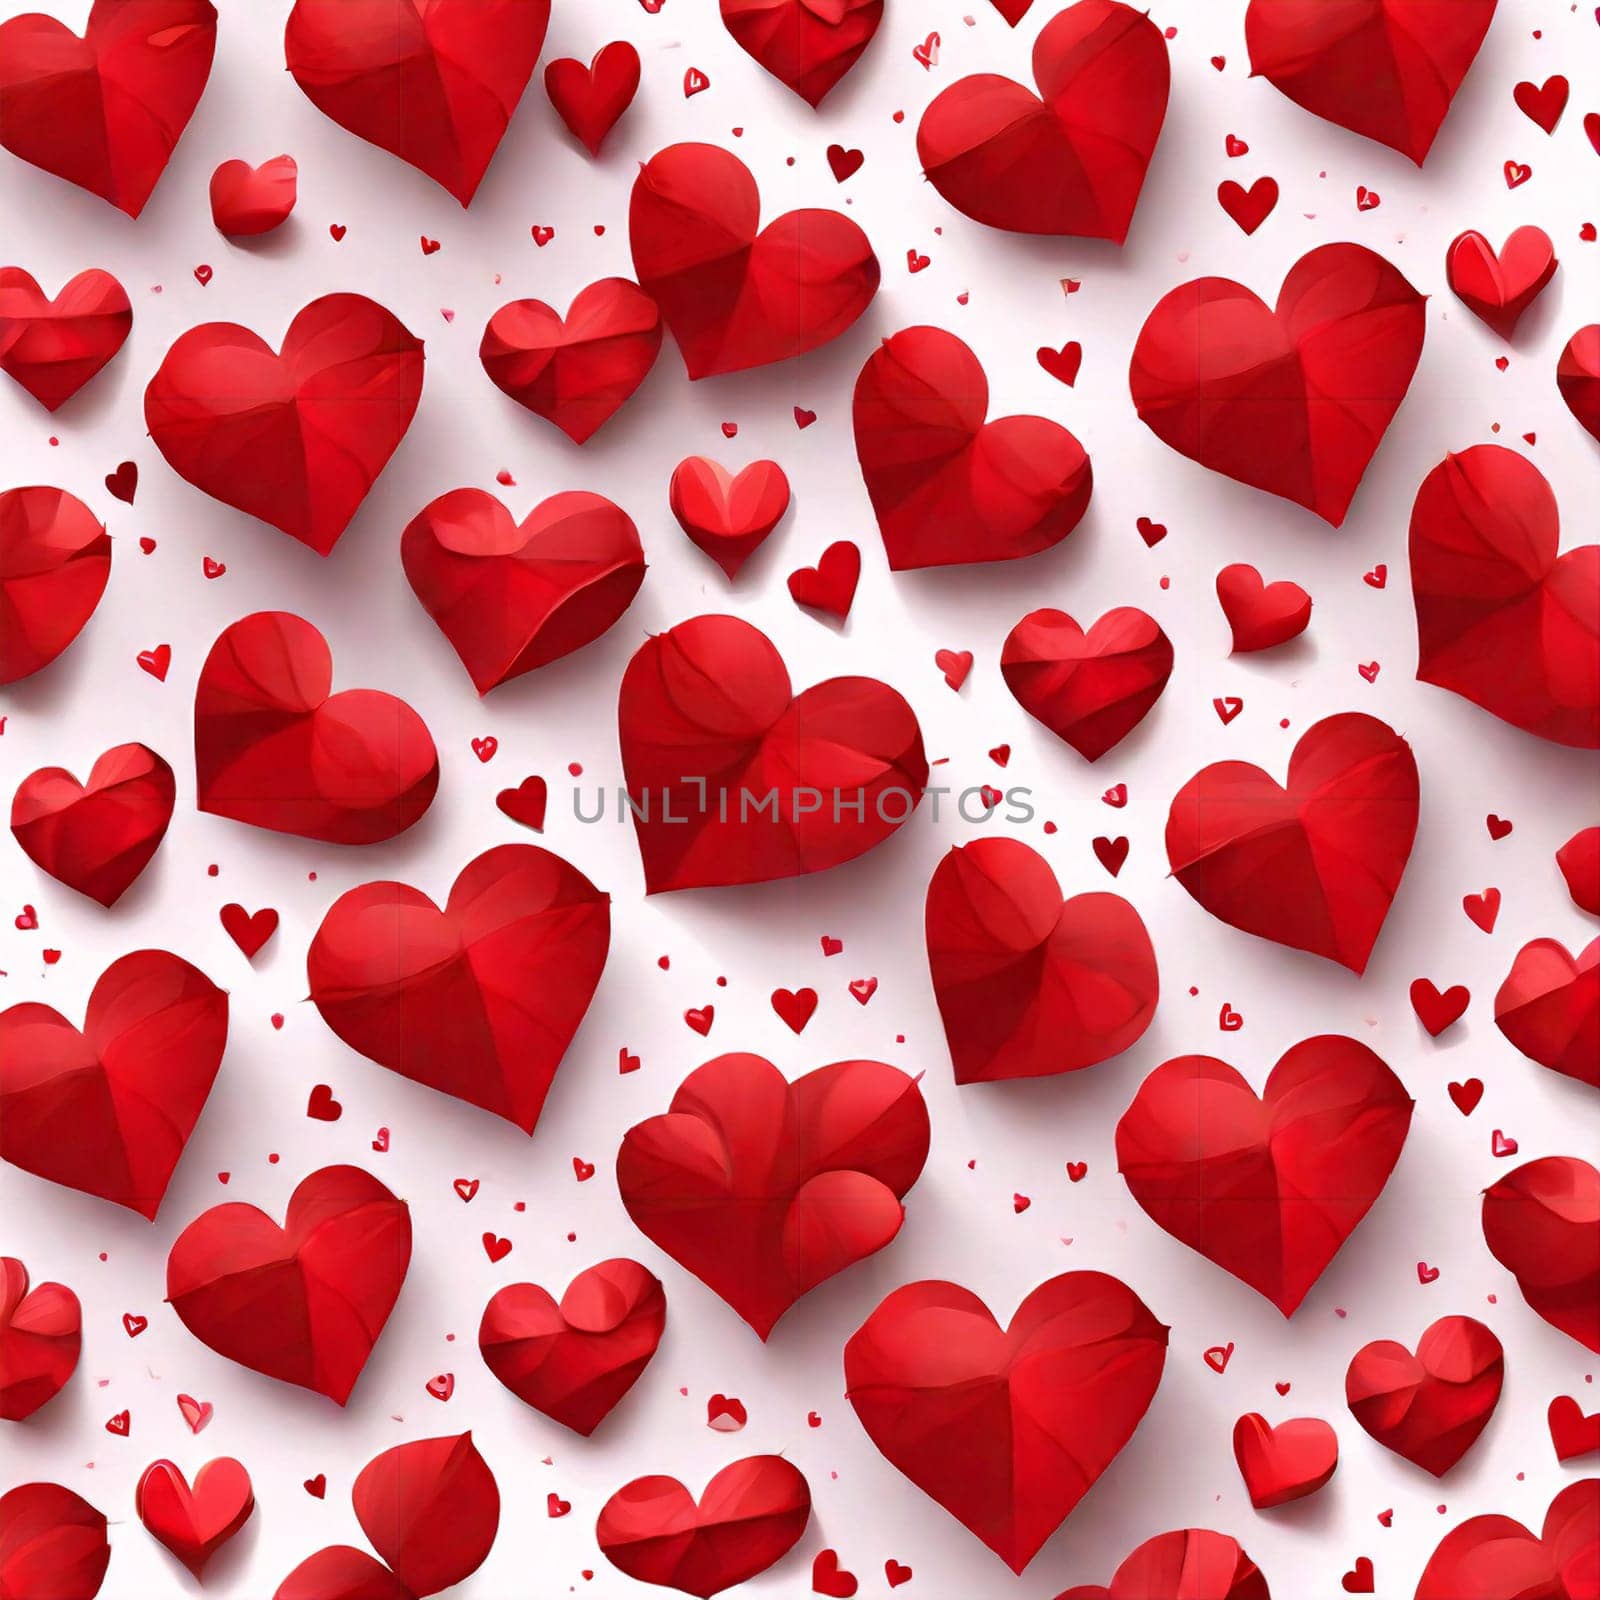 Seamless pattern of red hearts. Love concept. Design for packaging and backgrounds